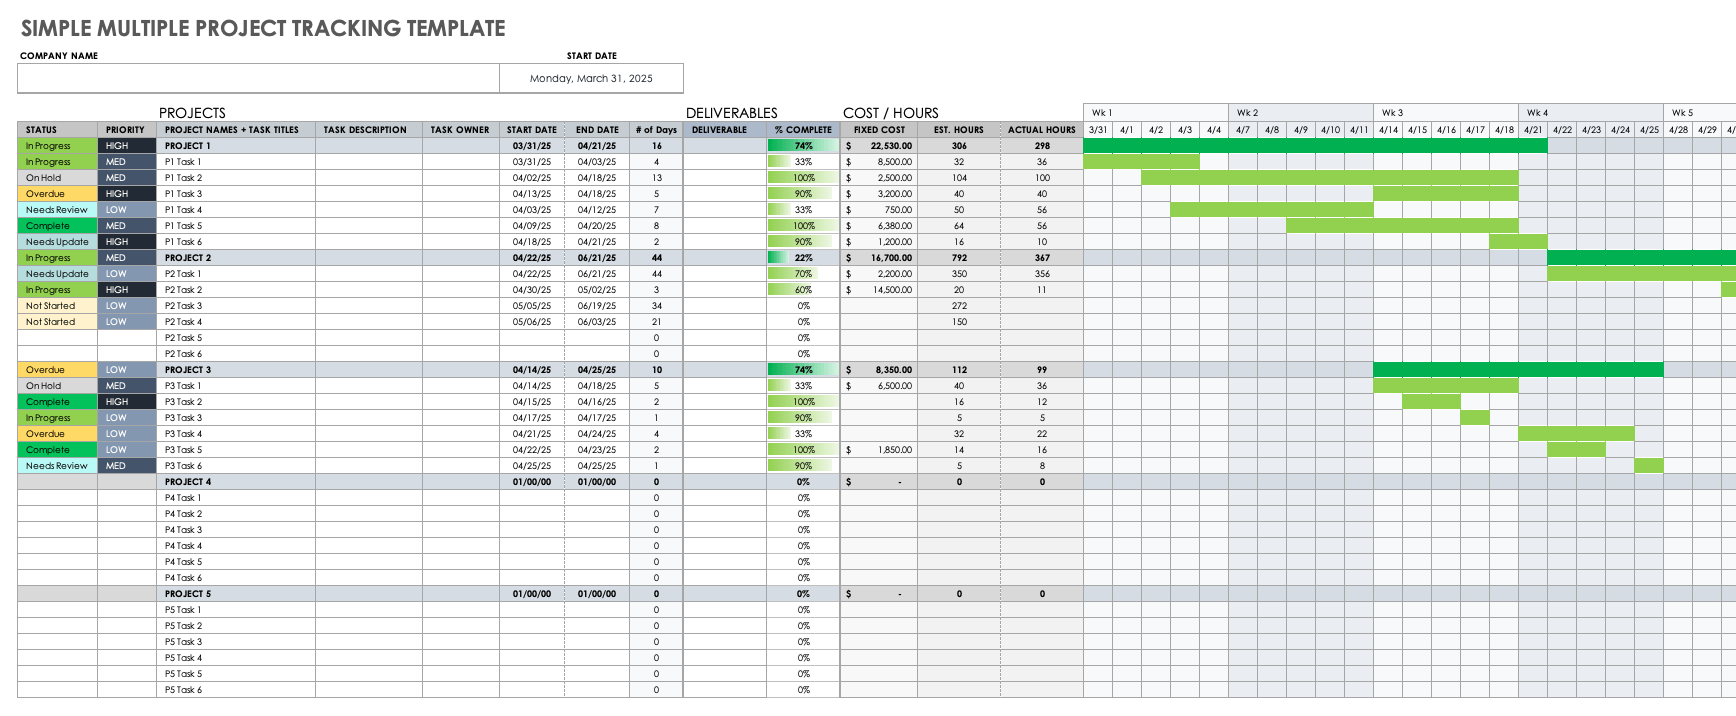 Simple Multiple Project Tracking Template